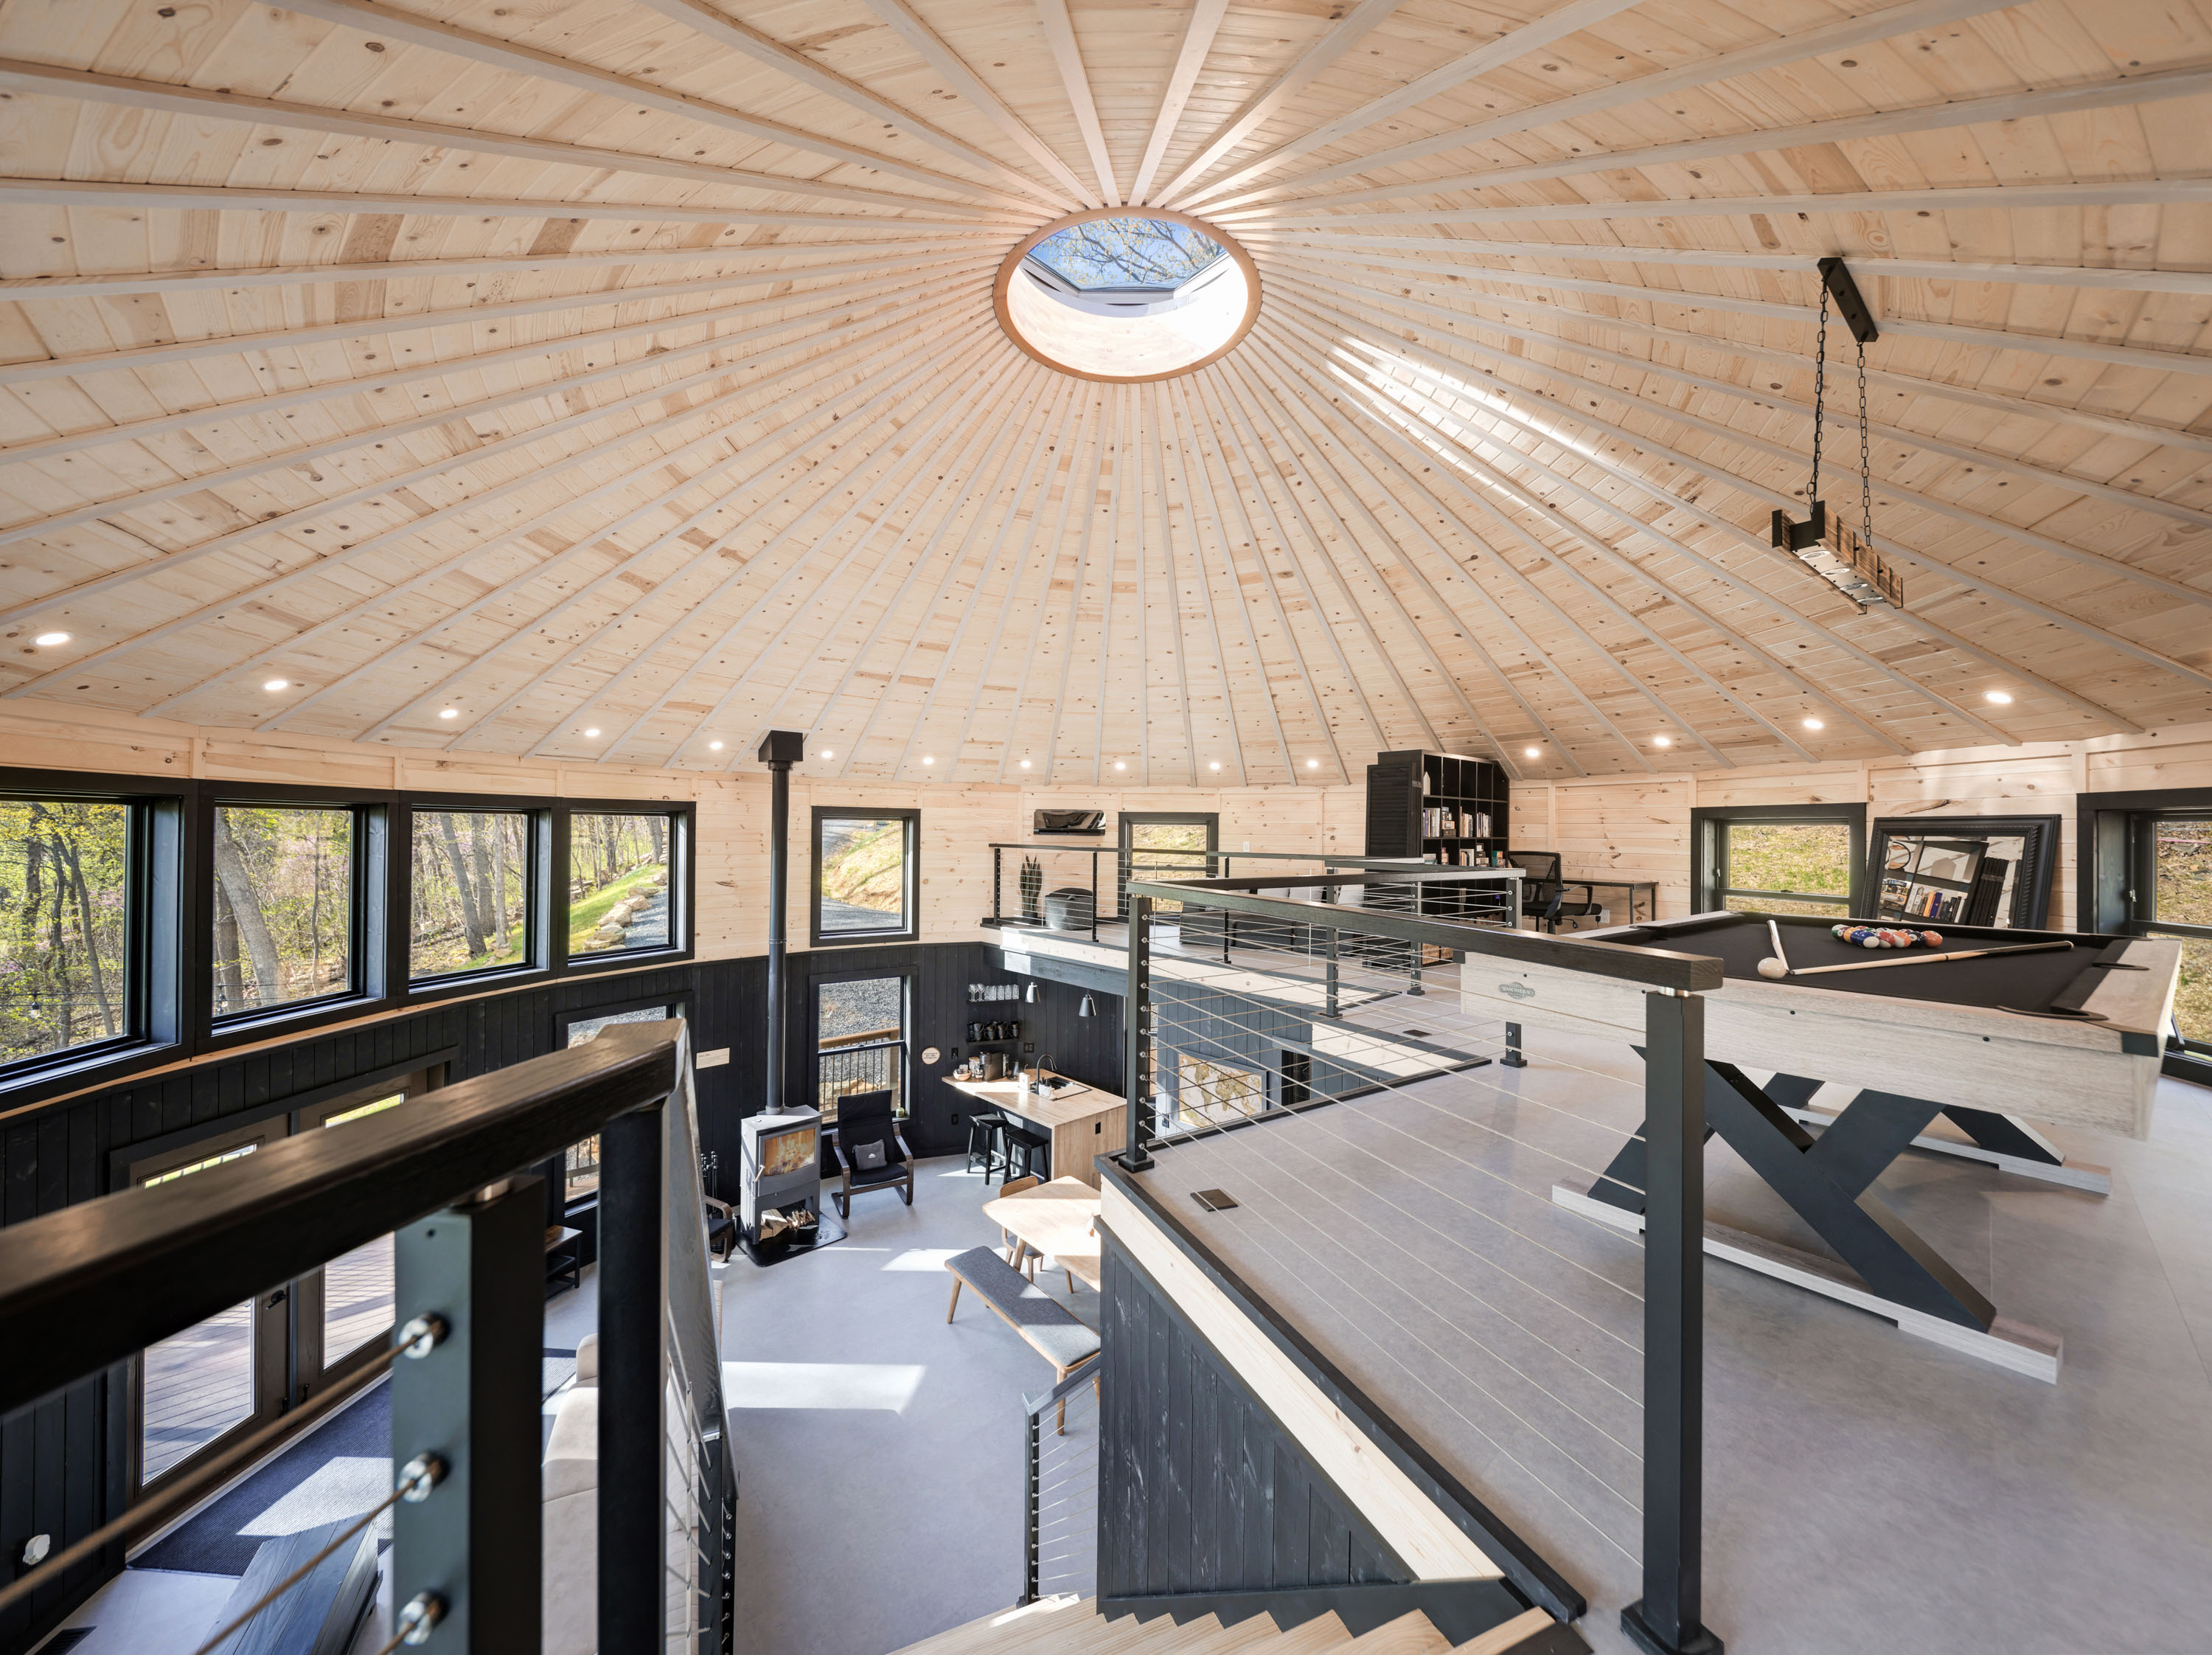 <span  class="uc_style_uc_tiles_grid_image_elementor_uc_items_attribute_title" style="color:#ffffff;">View from Stairs, Pool Table, Yurt Ceiling, Bookshelf, Wood Stove, Lounge Chairs - Skyline Yurt</span>